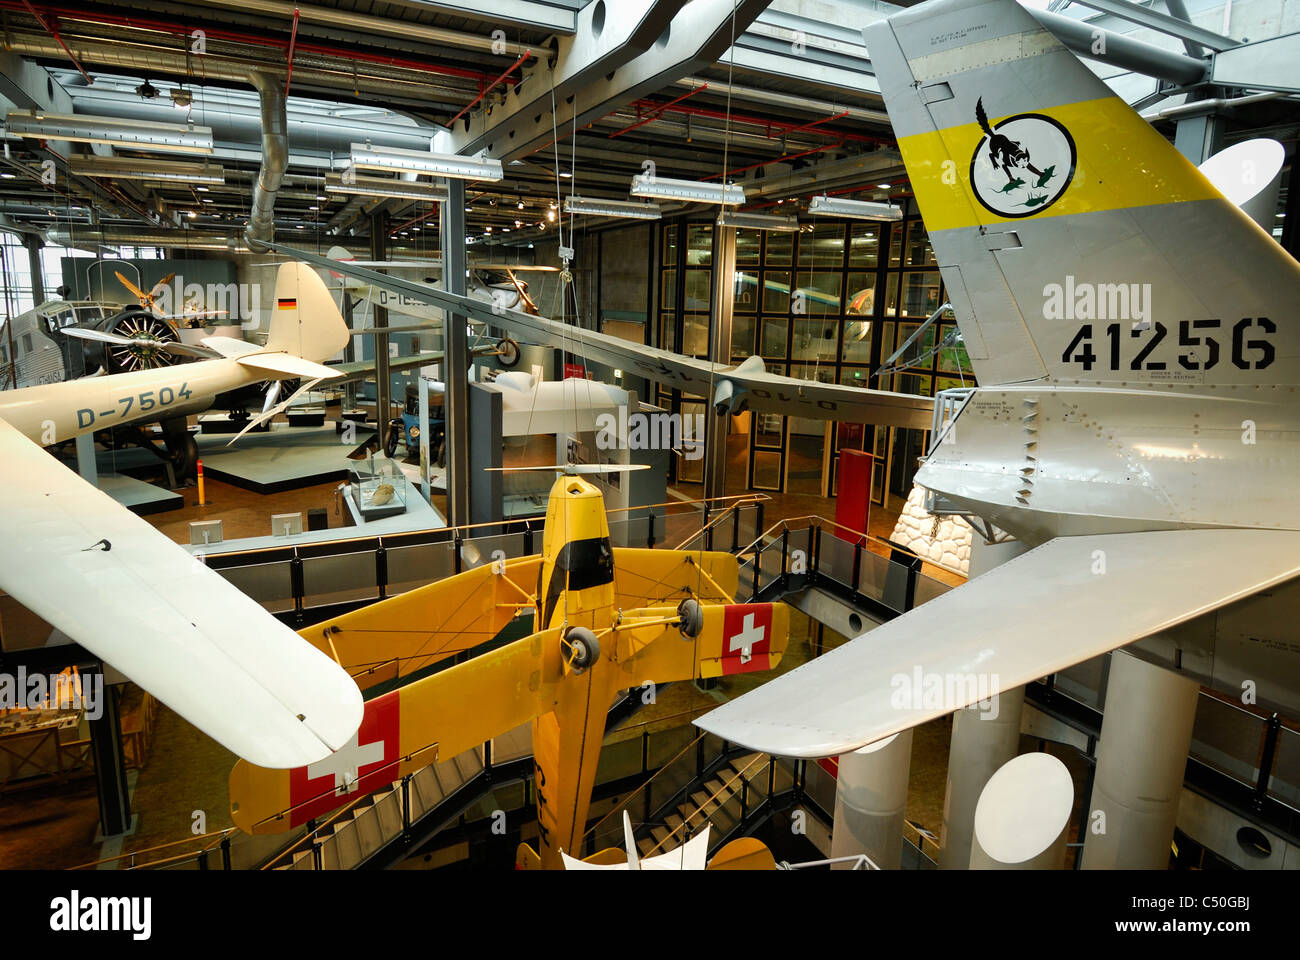 Berlin. Germany. The aviation hall in the Deutsches Technikmuseum / German Museum of Technology. Stock Photo